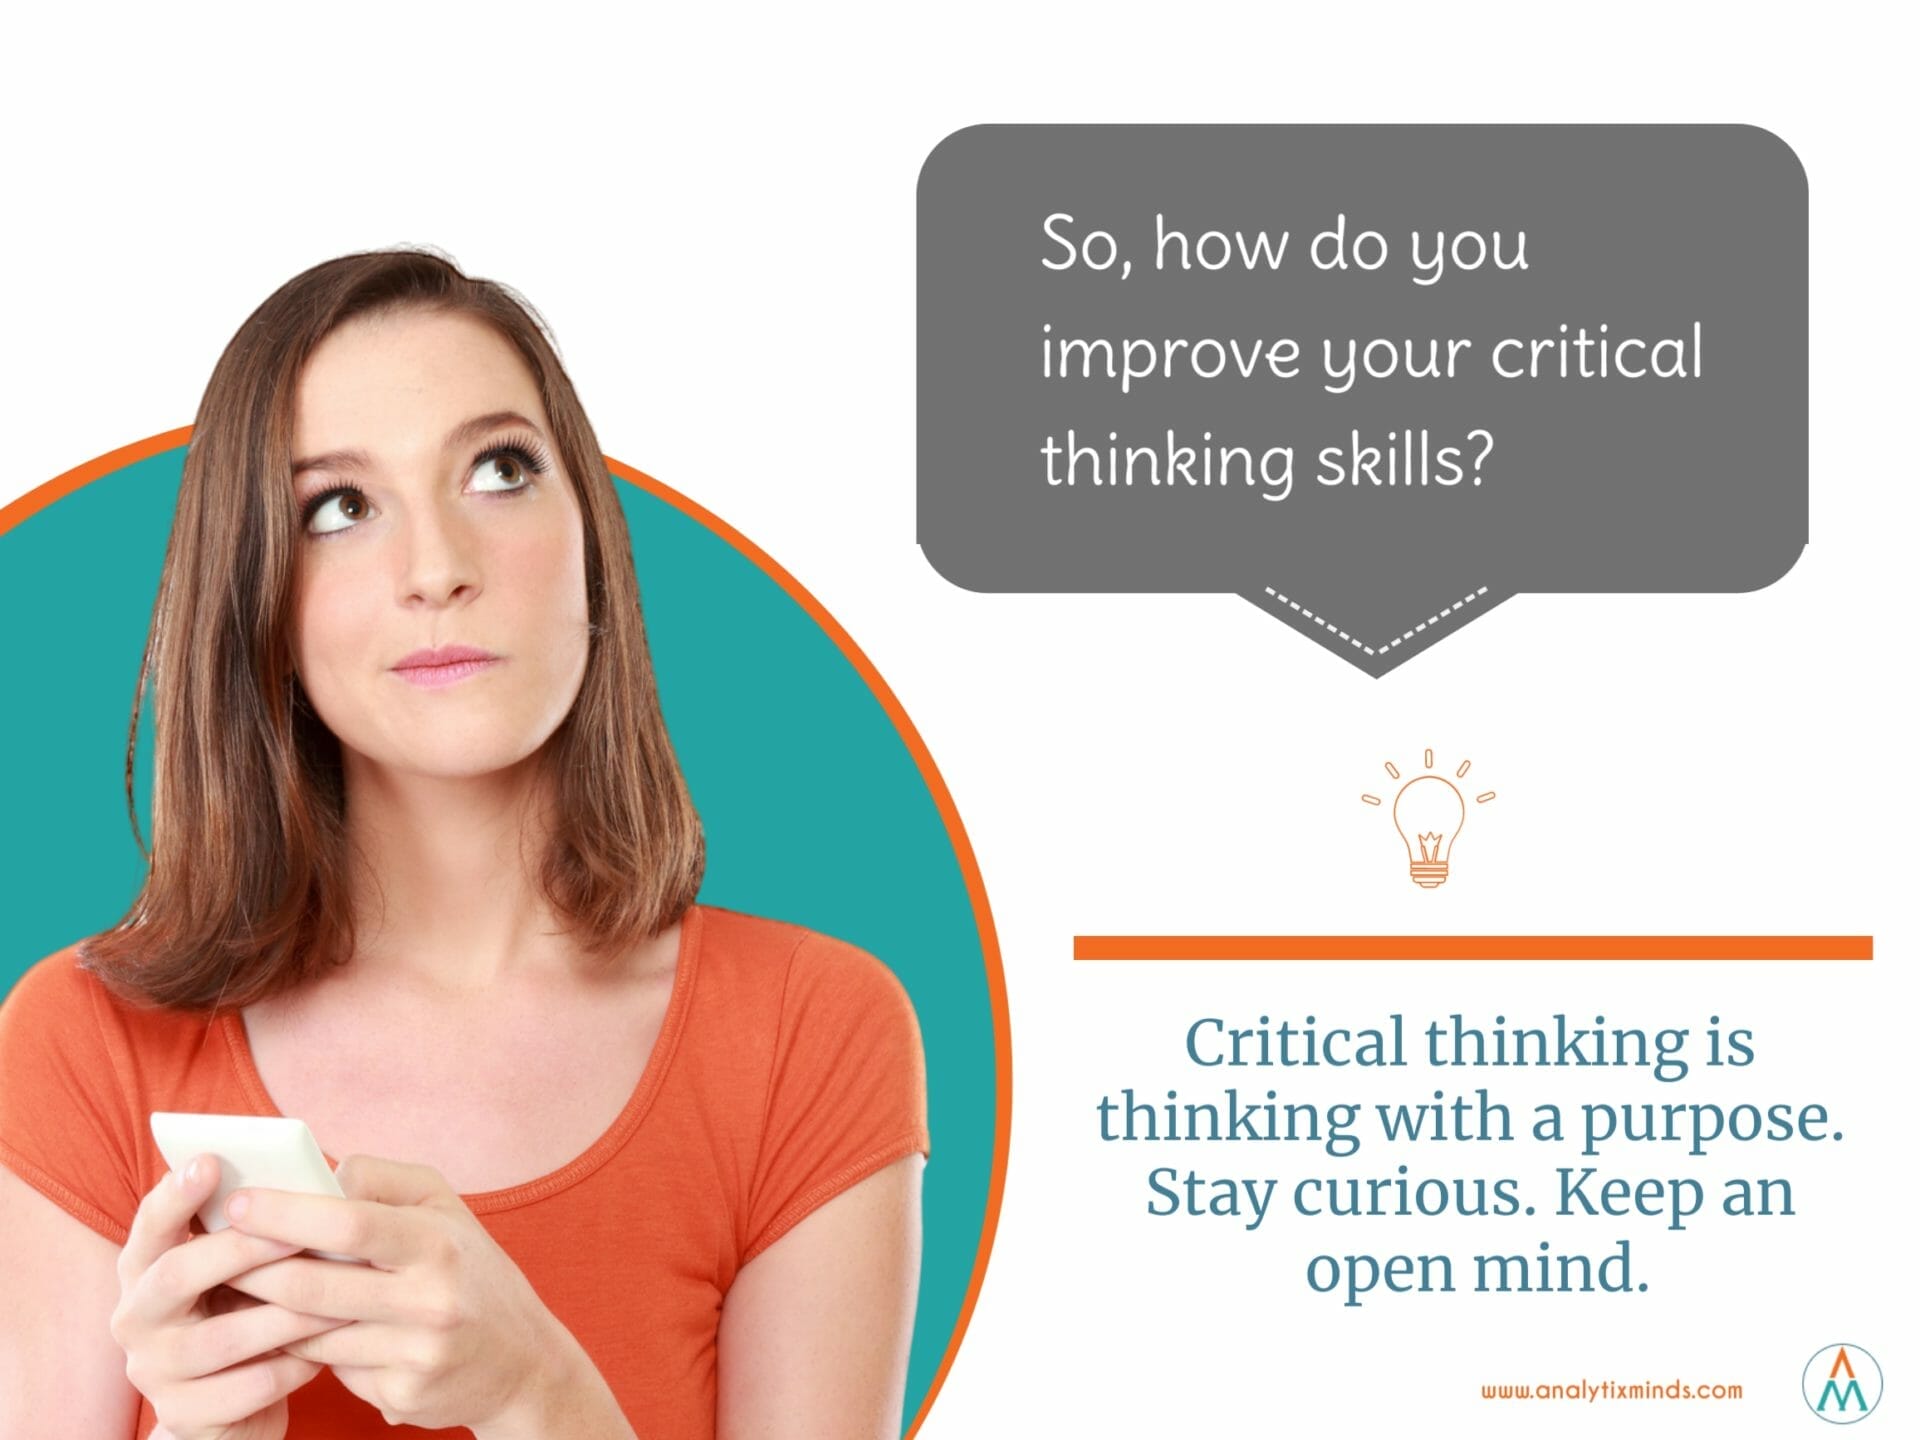 what is not a part of critical thinking